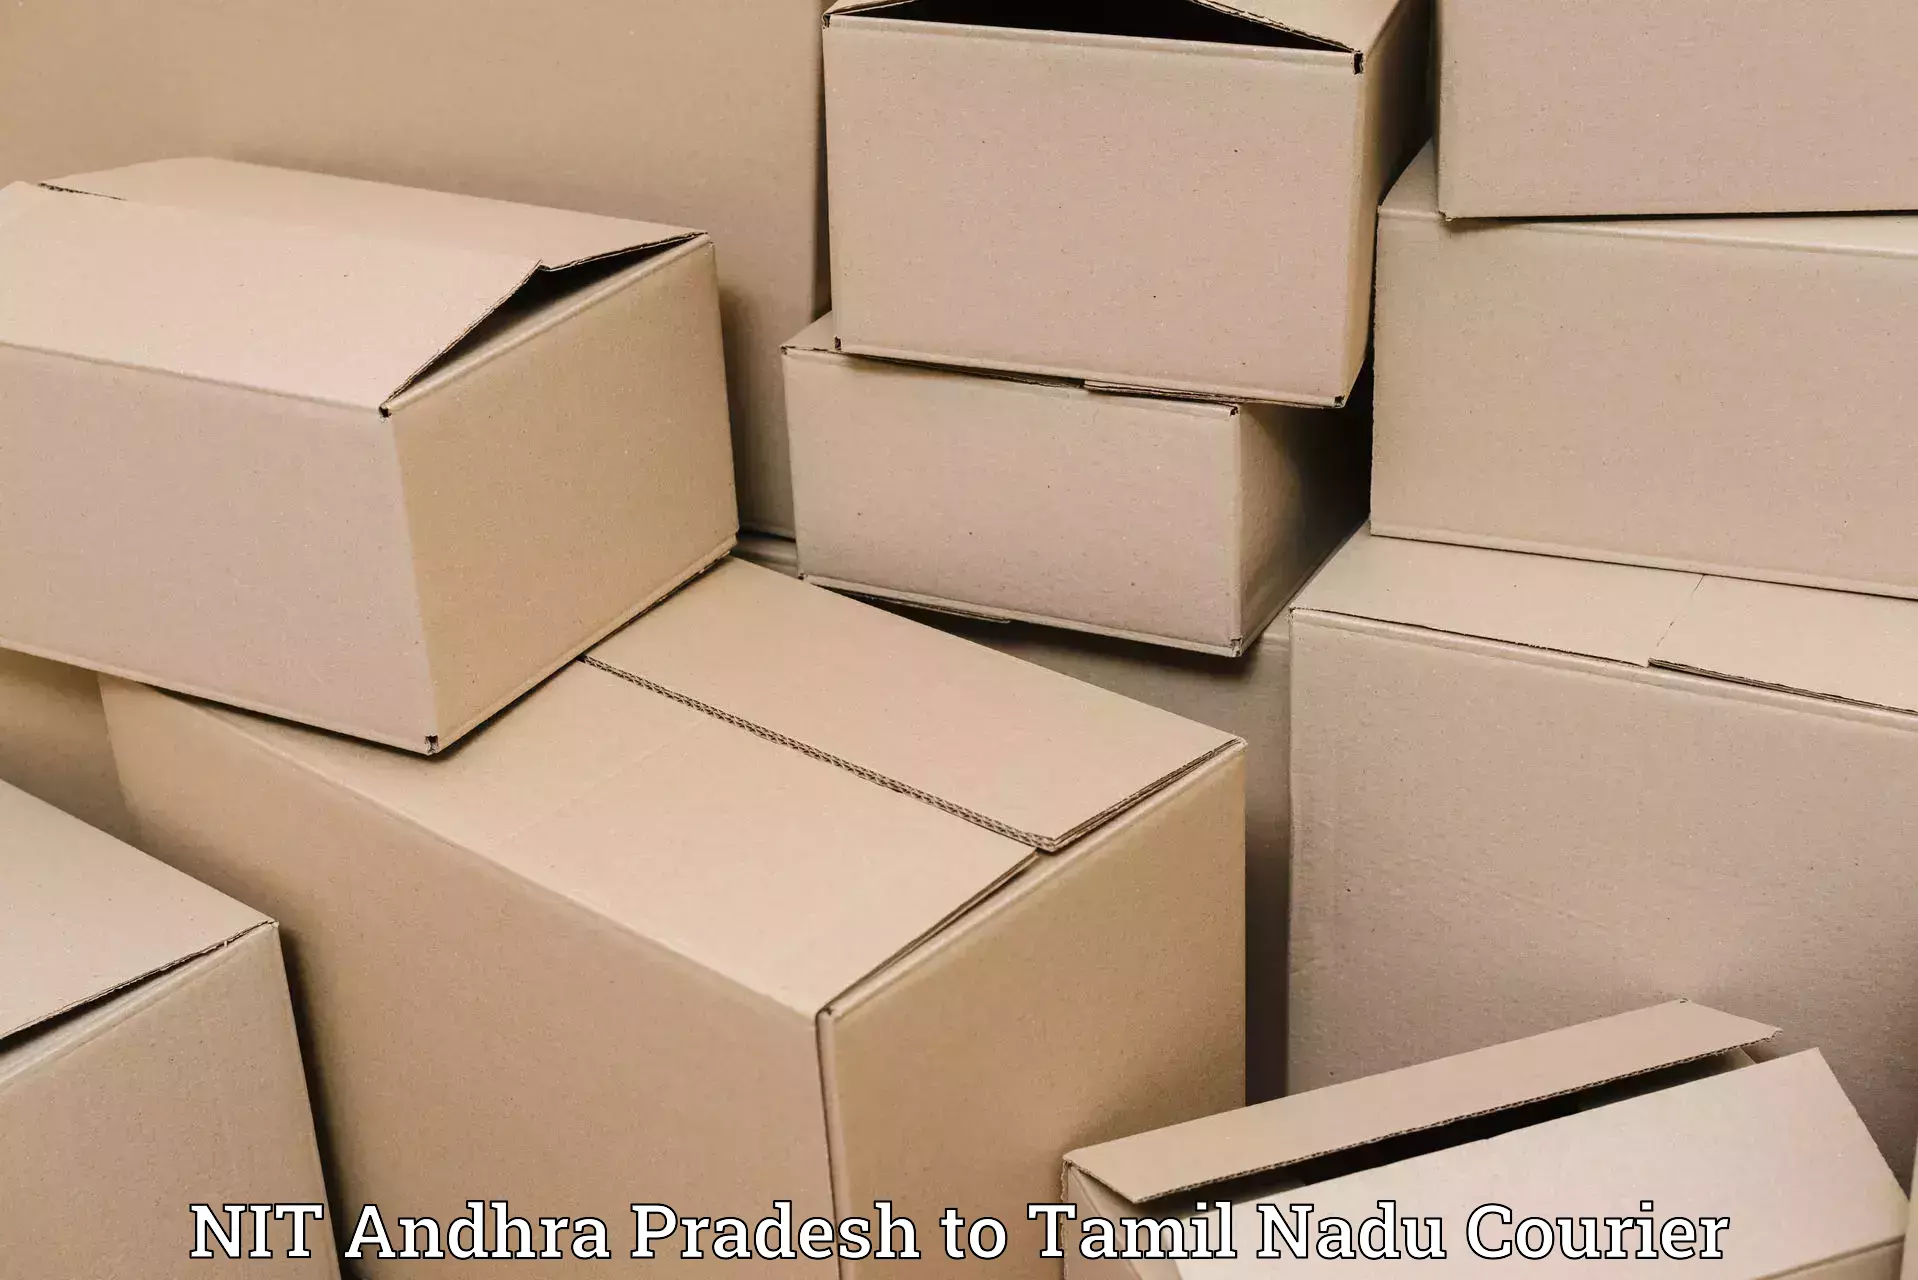 Courier service booking NIT Andhra Pradesh to Chennai Port